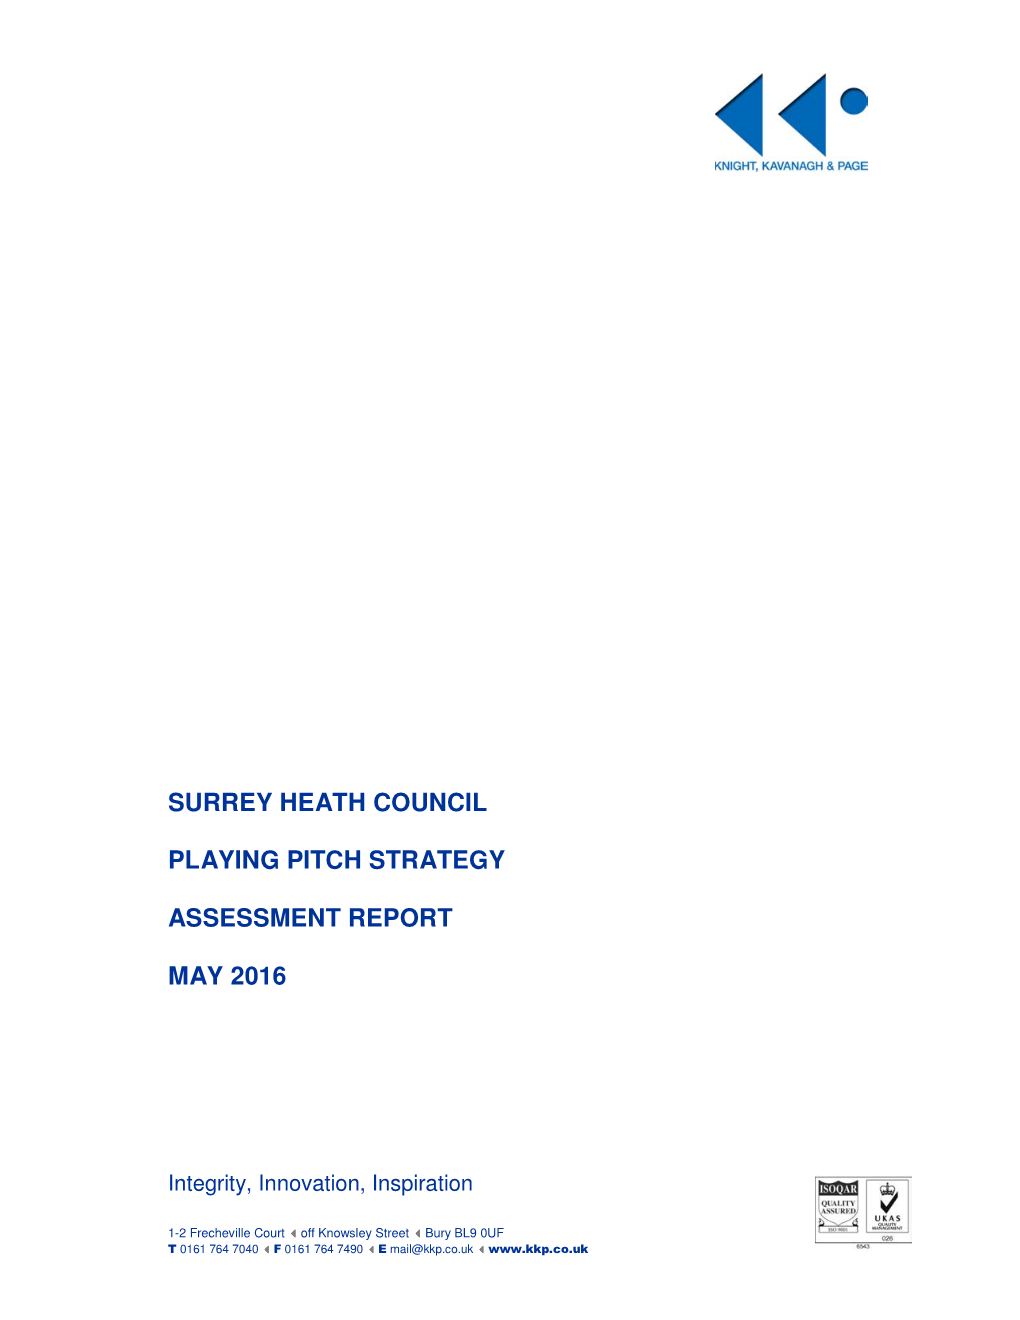 Surrey Heath Council Playing Pitch Strategy Assessment Report May 2016